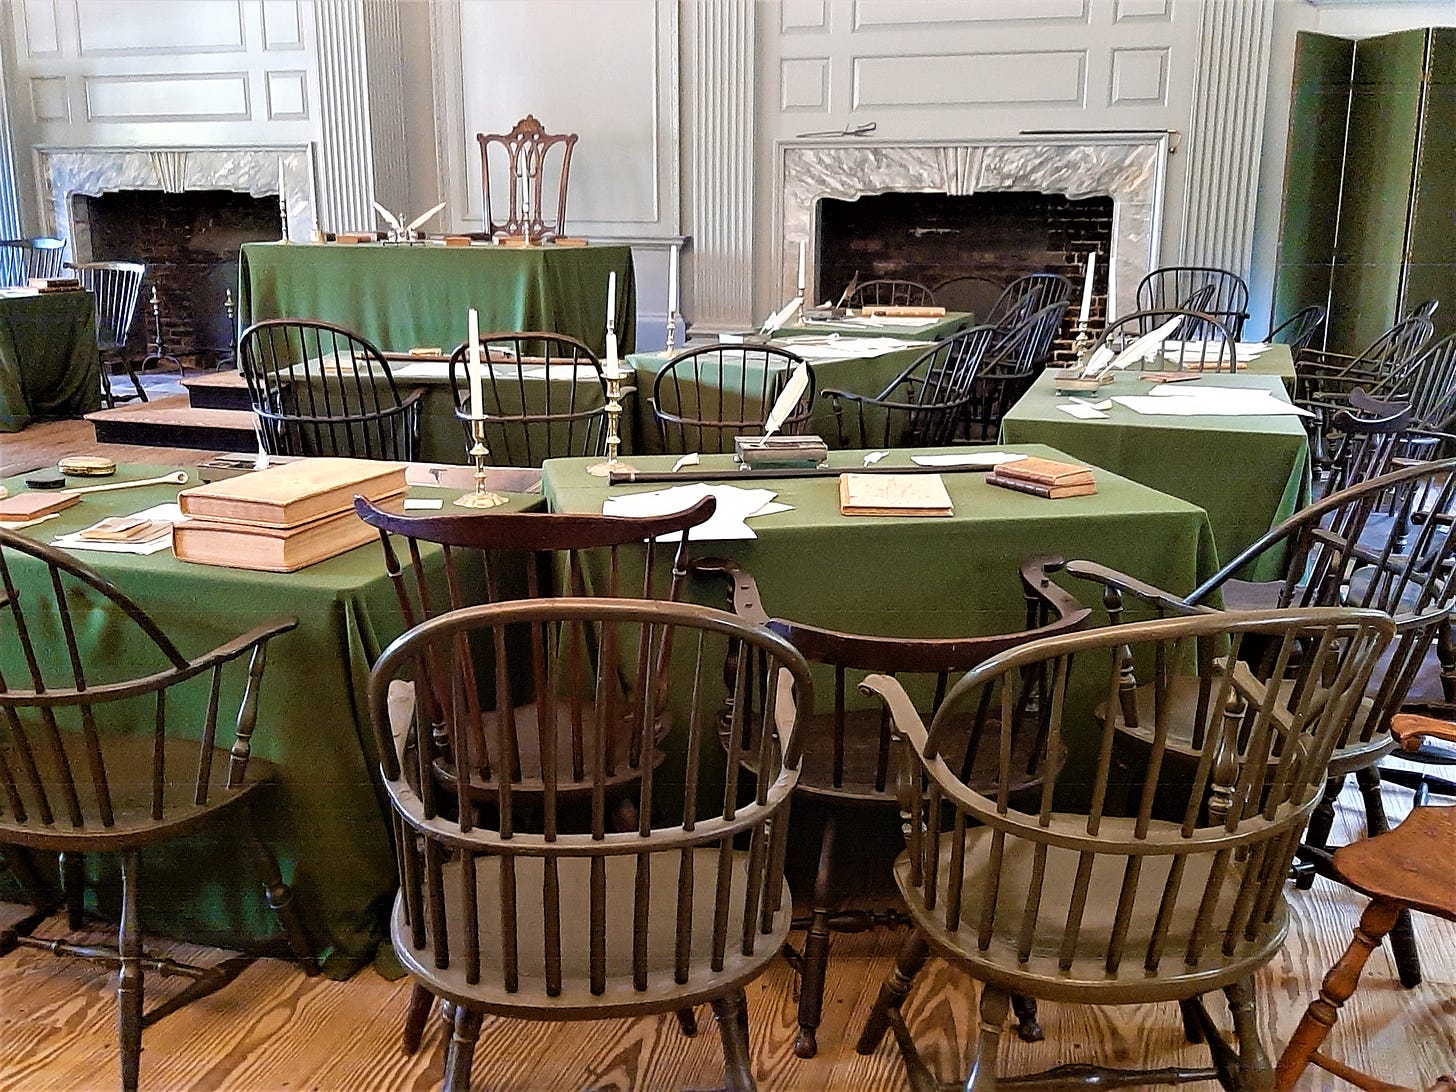 Old wooden chairs around tables with green cloths where the founders created the declaration of independence.